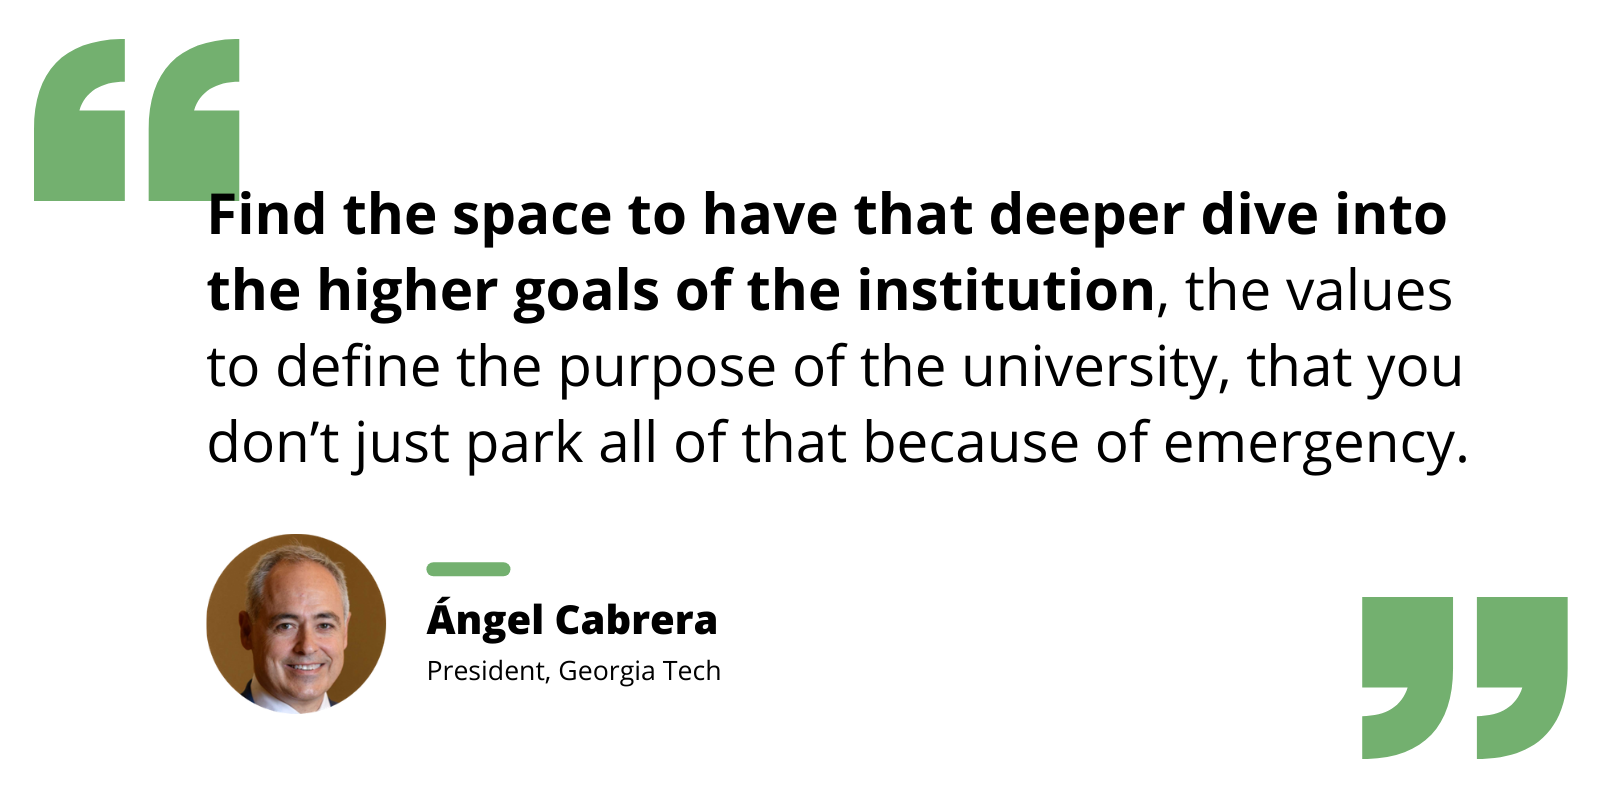 Quote by Angel Cabrera re: defining the university's spirit, heart, values, and purpose, even during an emergency.